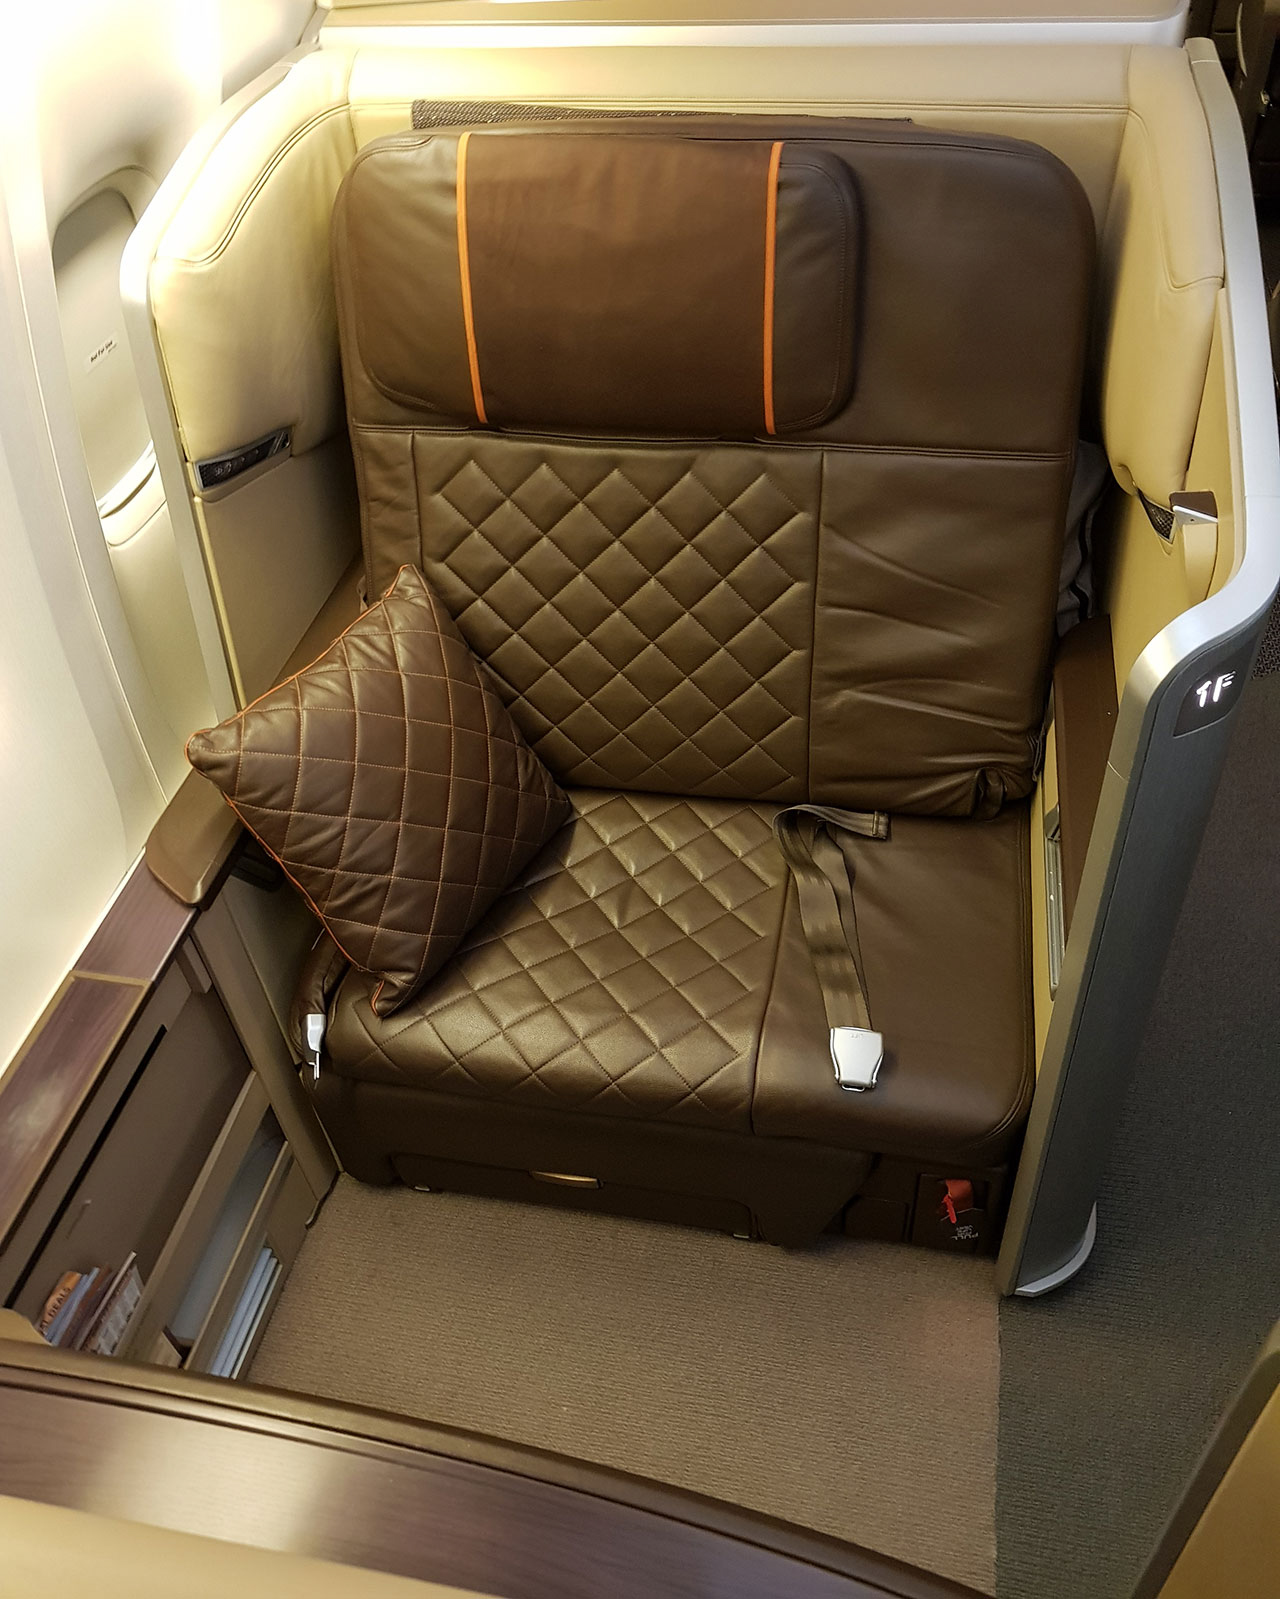 Singapore Airlines 777-300ER First Class